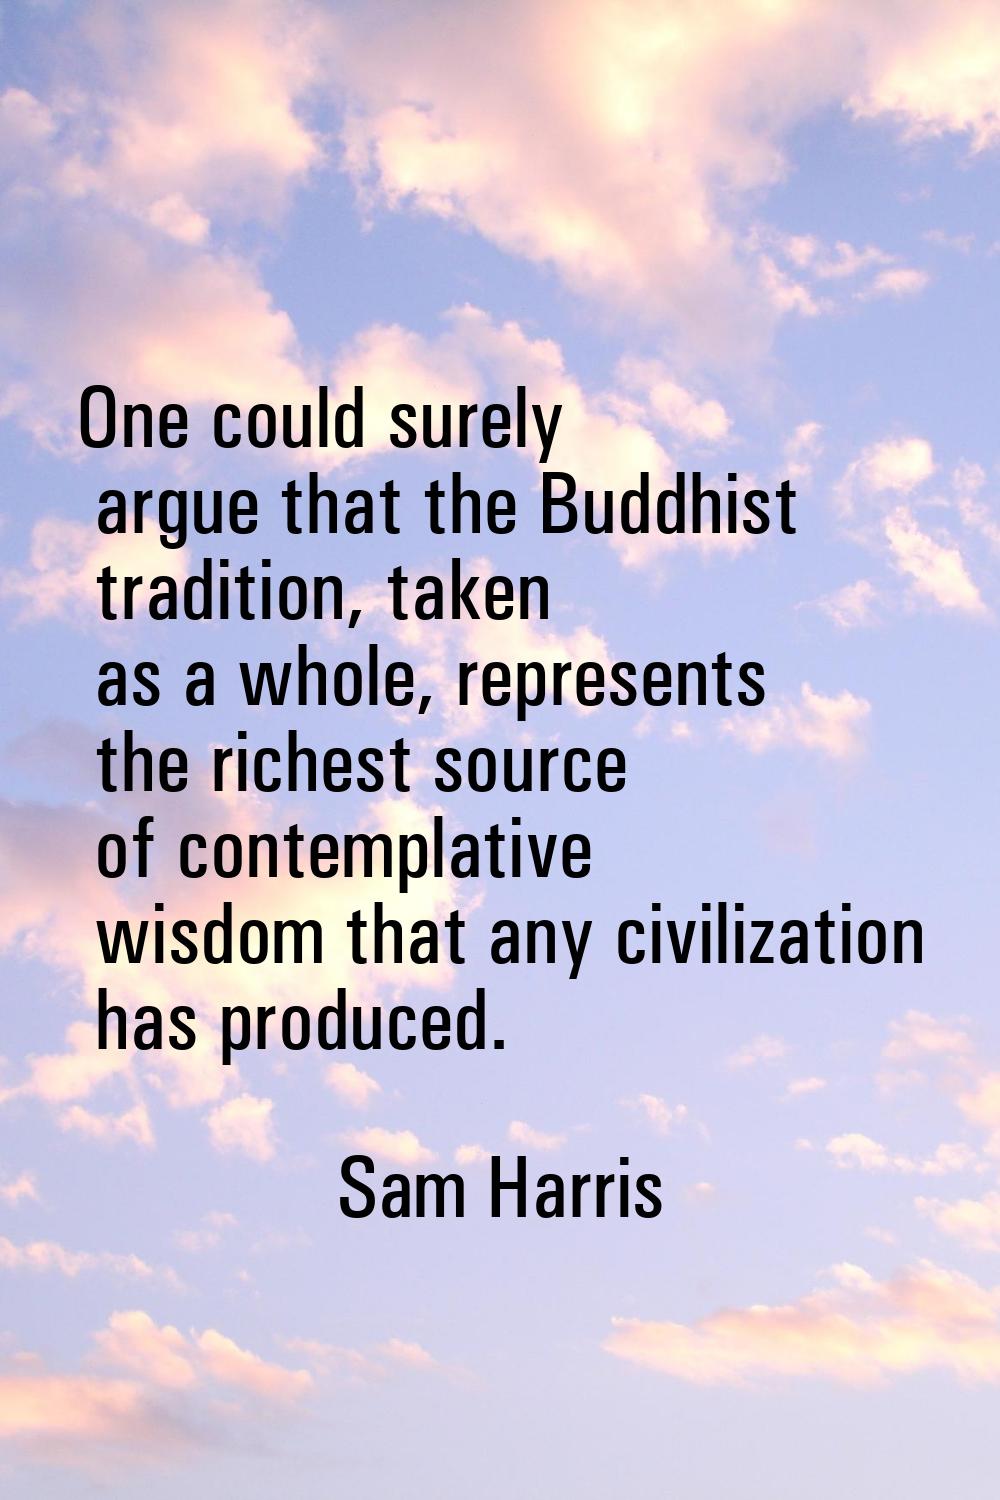 One could surely argue that the Buddhist tradition, taken as a whole, represents the richest source